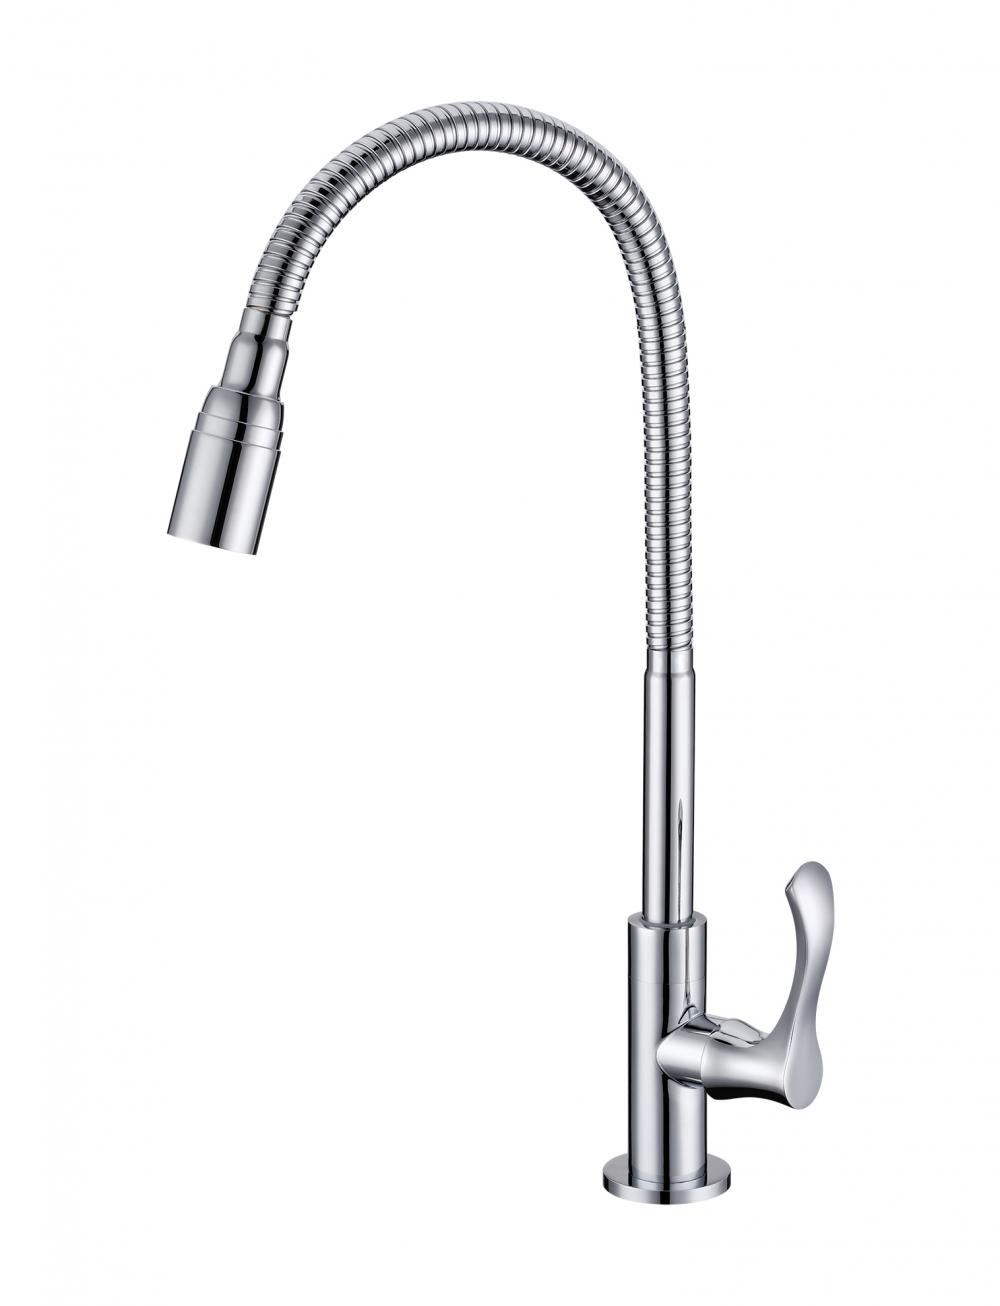 KITCHEN SINK FAUCETS